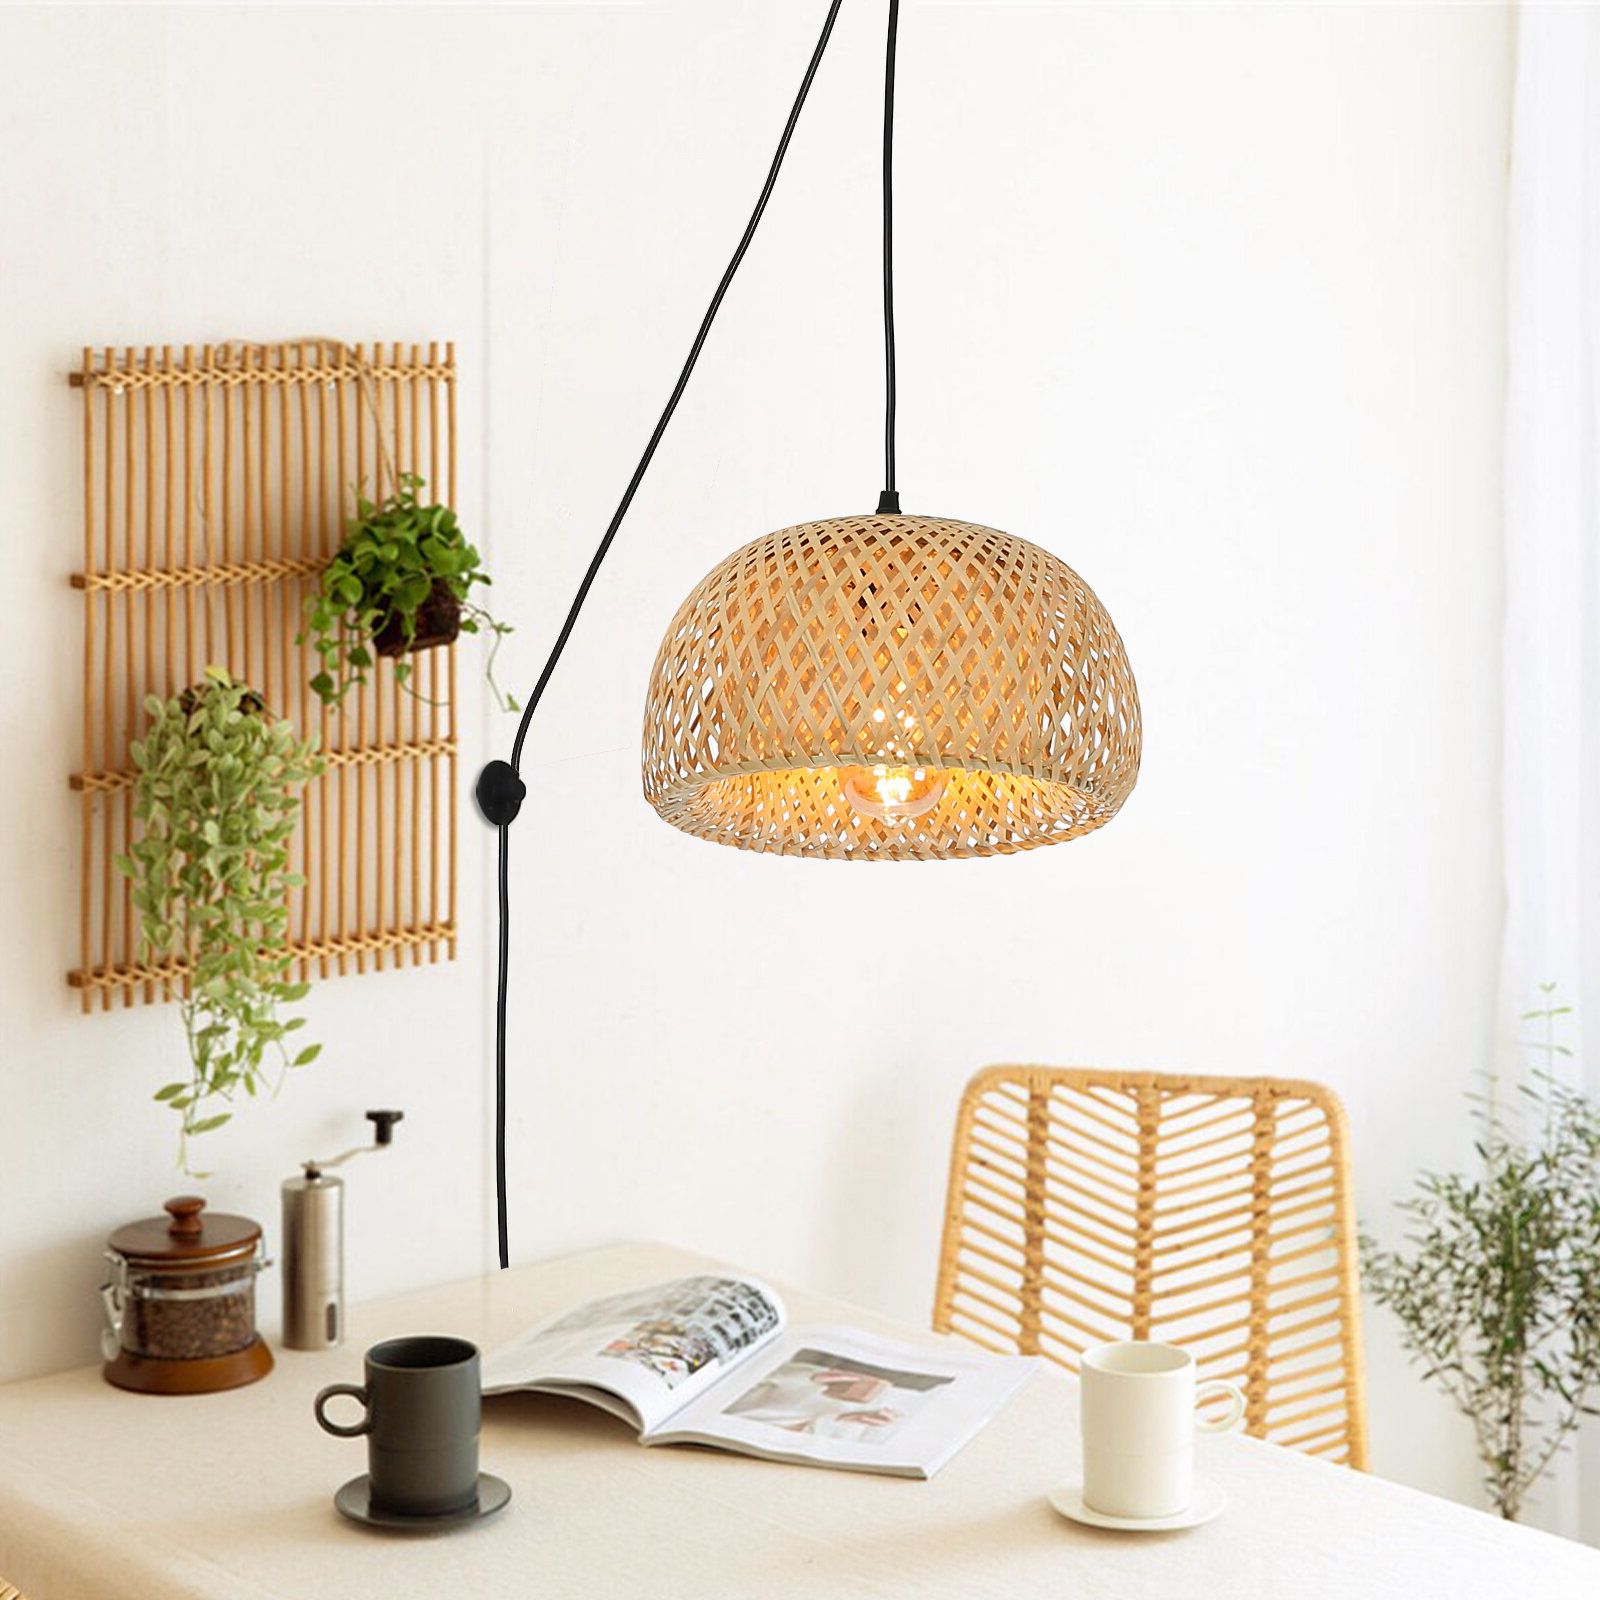 2020 Bayou Breeze Galeville Modern Plug In Cord Bamboo Lantern Pendant Light  Fixture With Switch – Rustic Woven Bird Nest Rattan Shade Chandelier  Adjustable Hanging Wall Lamp, For Living Room, Bedroom, Dining Room, Intended For Rattan Lantern Chandeliers (View 14 of 15)